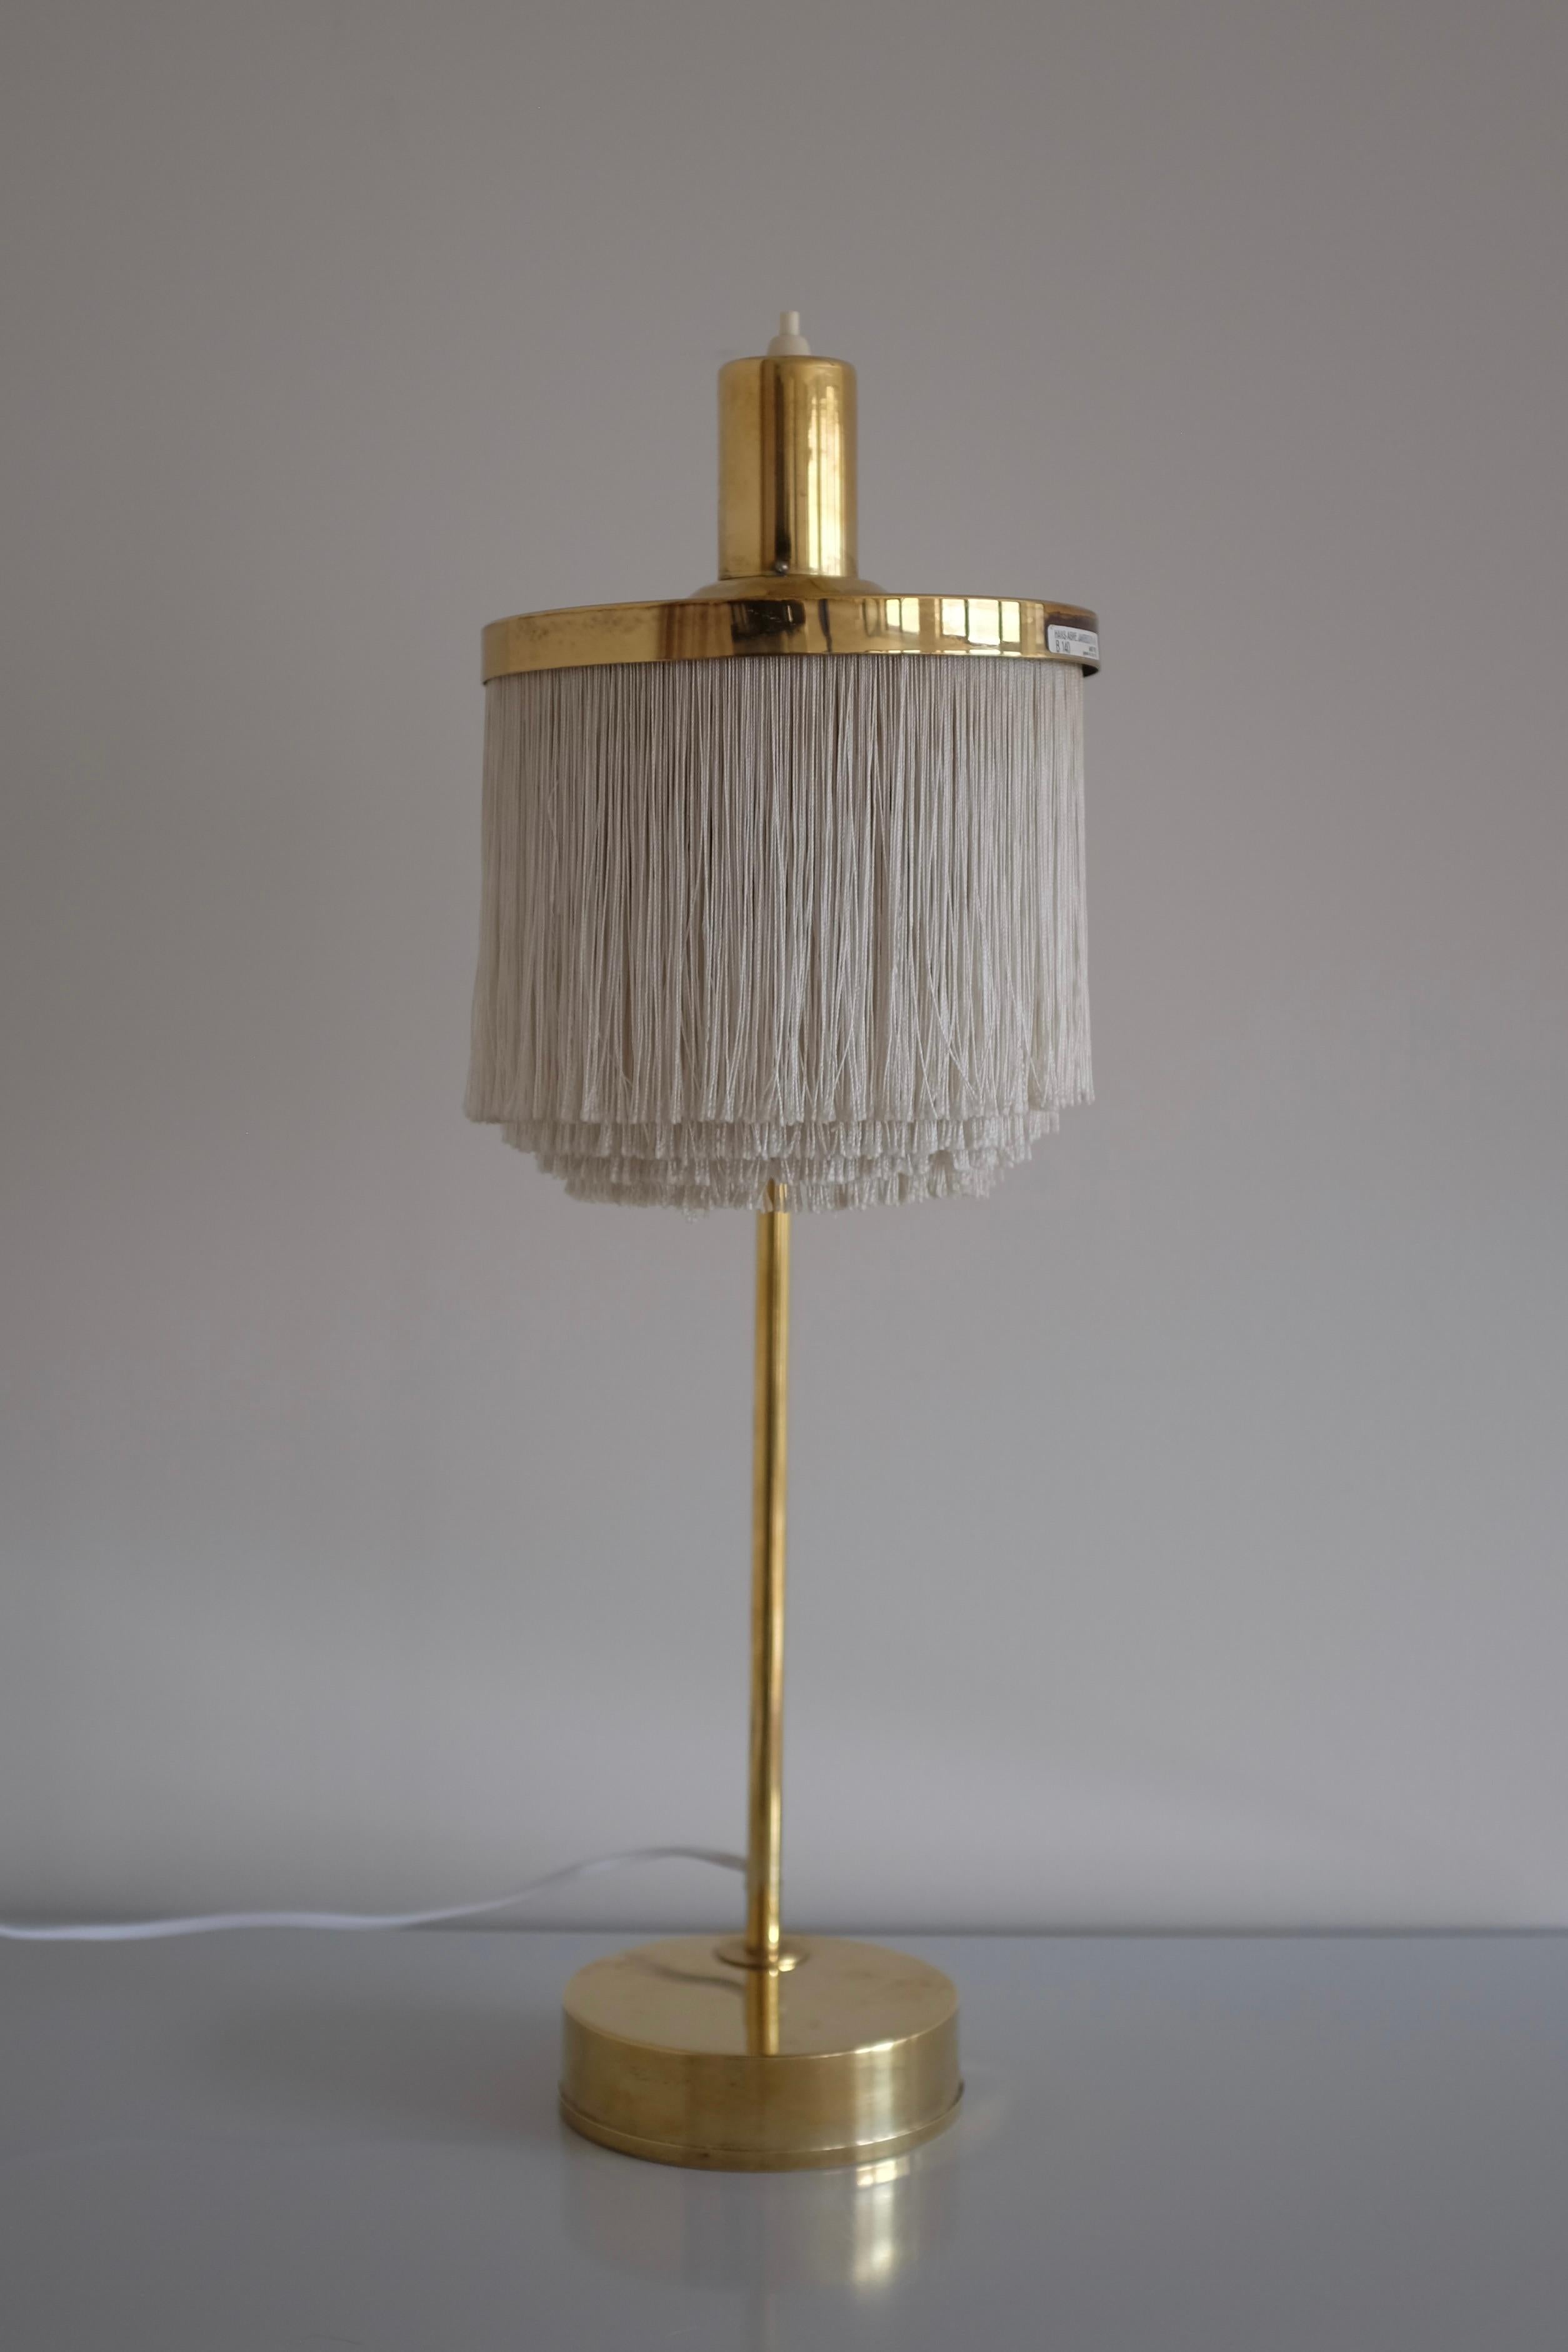 Iconic Fringe and Brass Table Lamp B-140 by Hans Agne Jakobsson. Manufactured in the late 1960s and part of one of Hans Agne Jakobsson most famous collections where the lamp shade consist of silk fabric fringes. Age appropriate wear with patina to